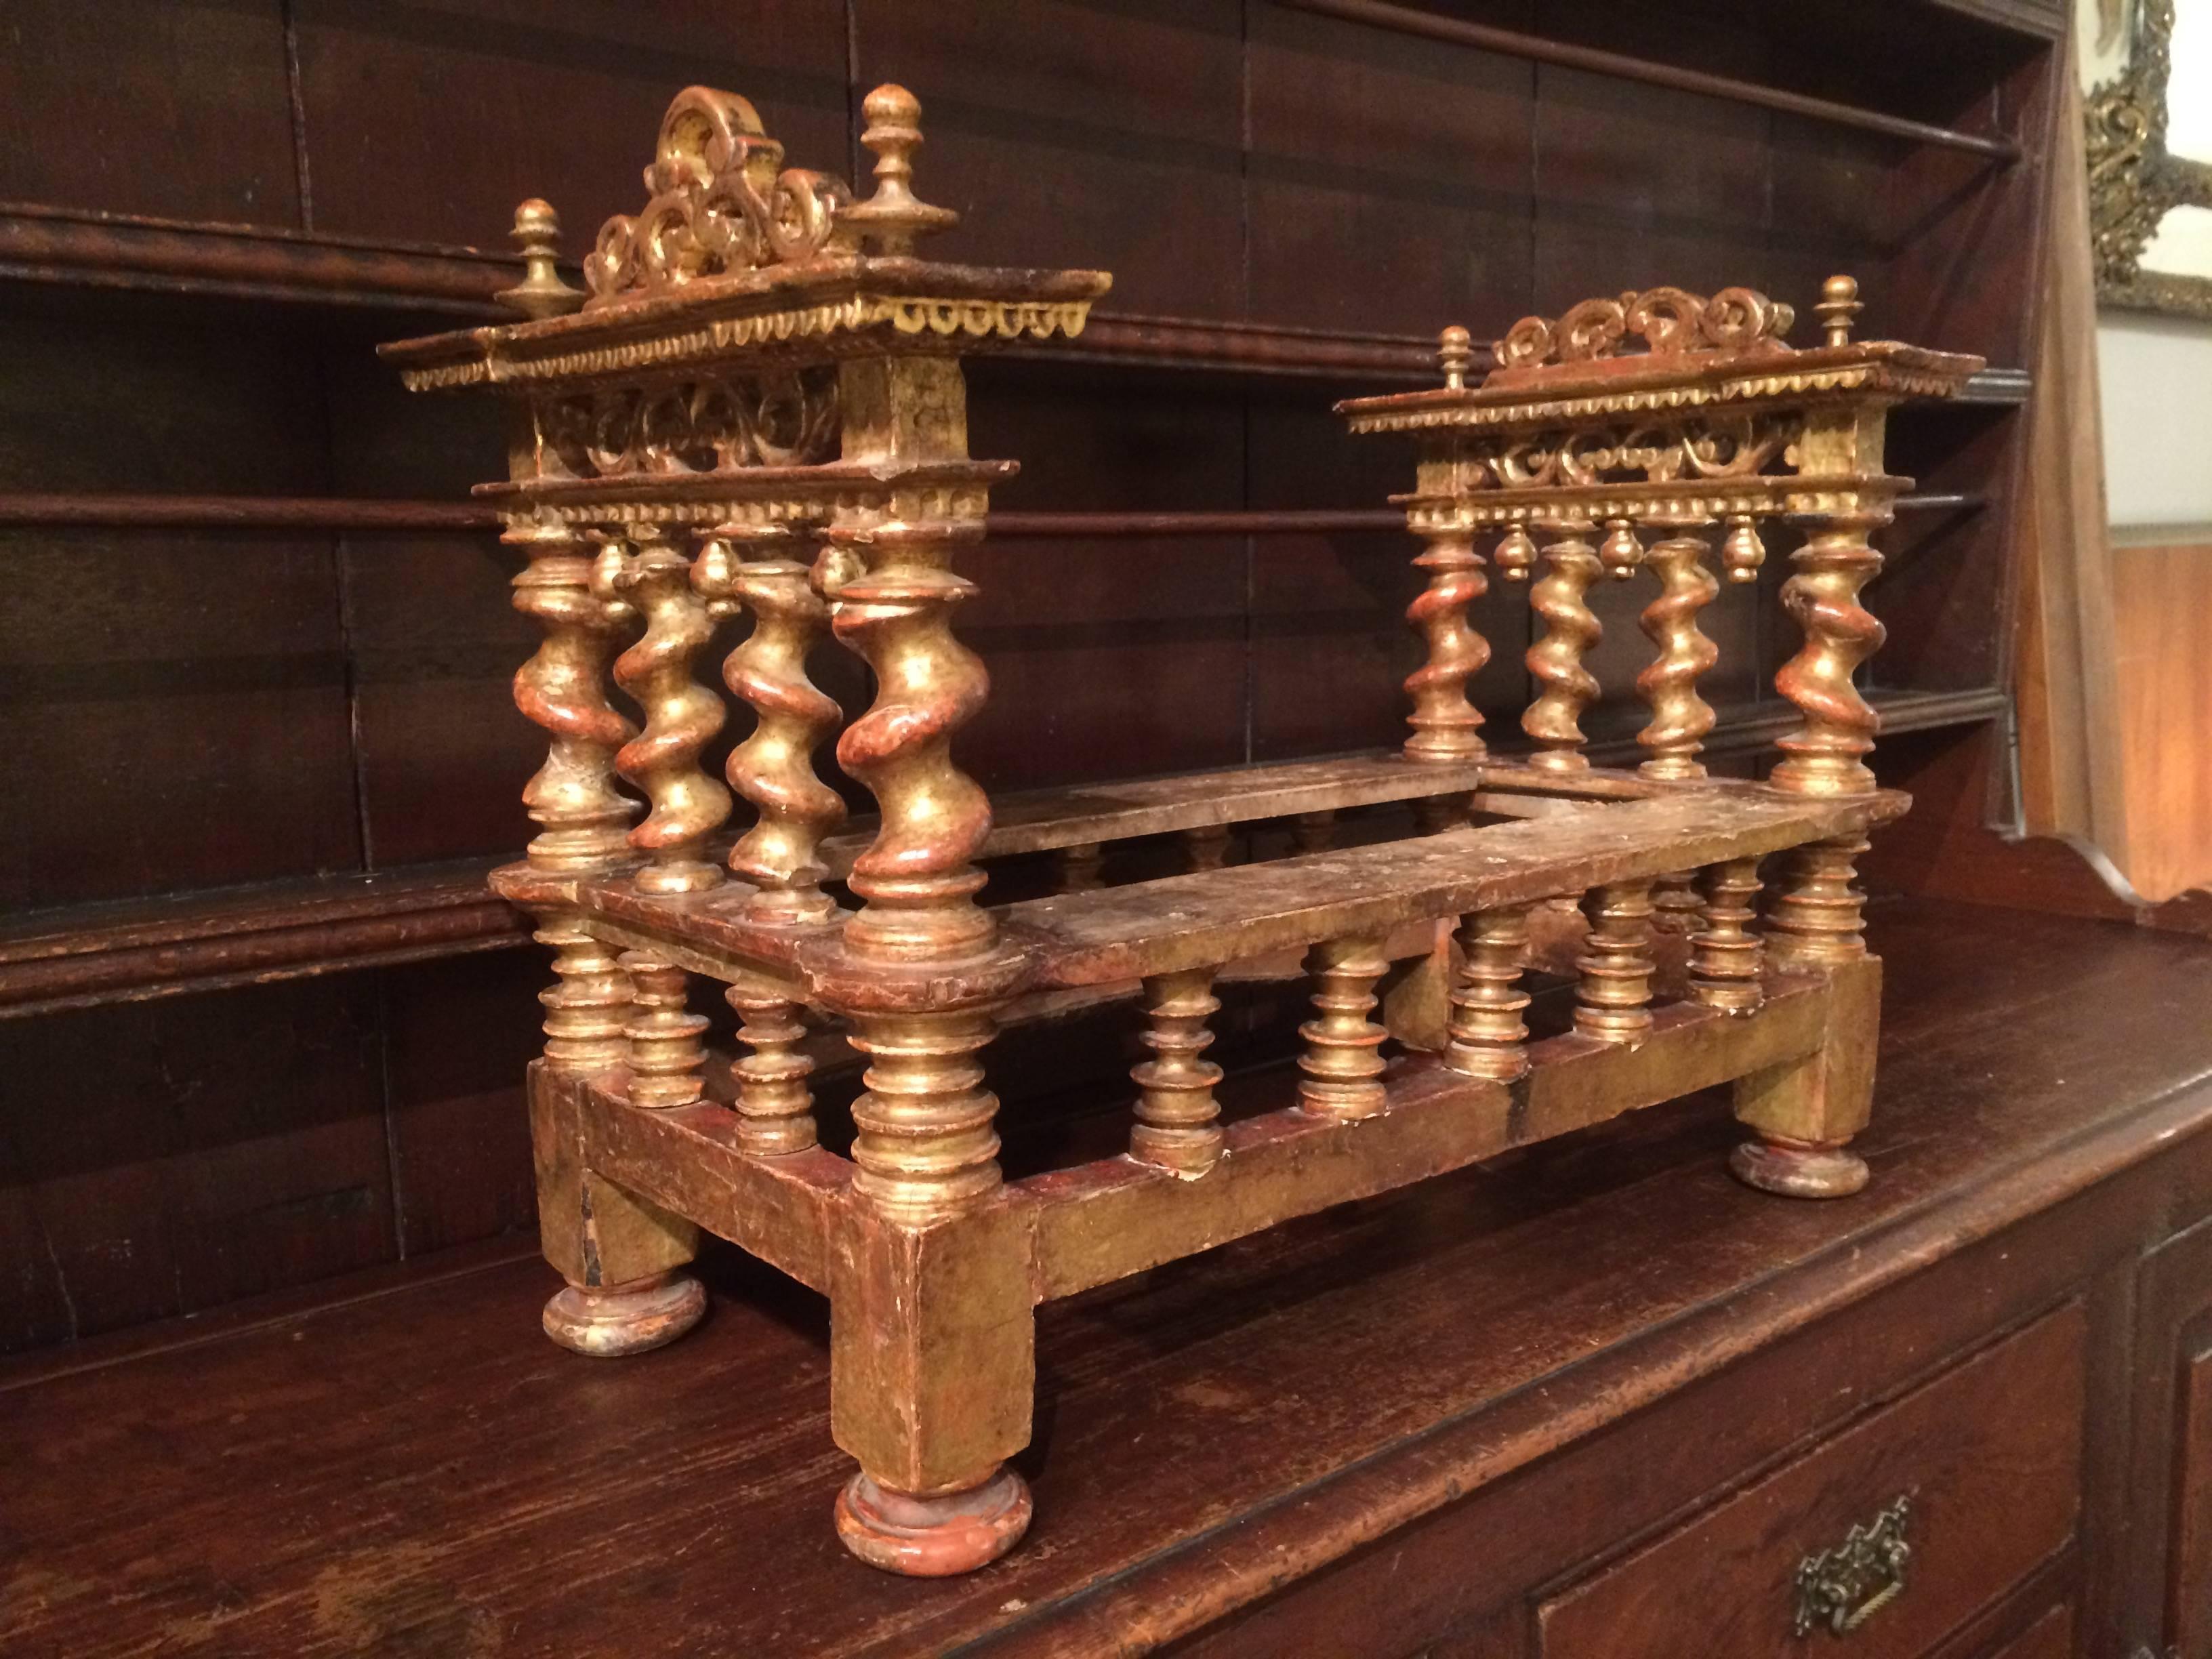 Unusual 18th century Italian baroque gilt wood  bed or possibly dog bed with exuberant carving and Solomonic columns. The bed was most likely made for a carving of 'El Nino', the Christ Child. A wonderful piece of workmanship.